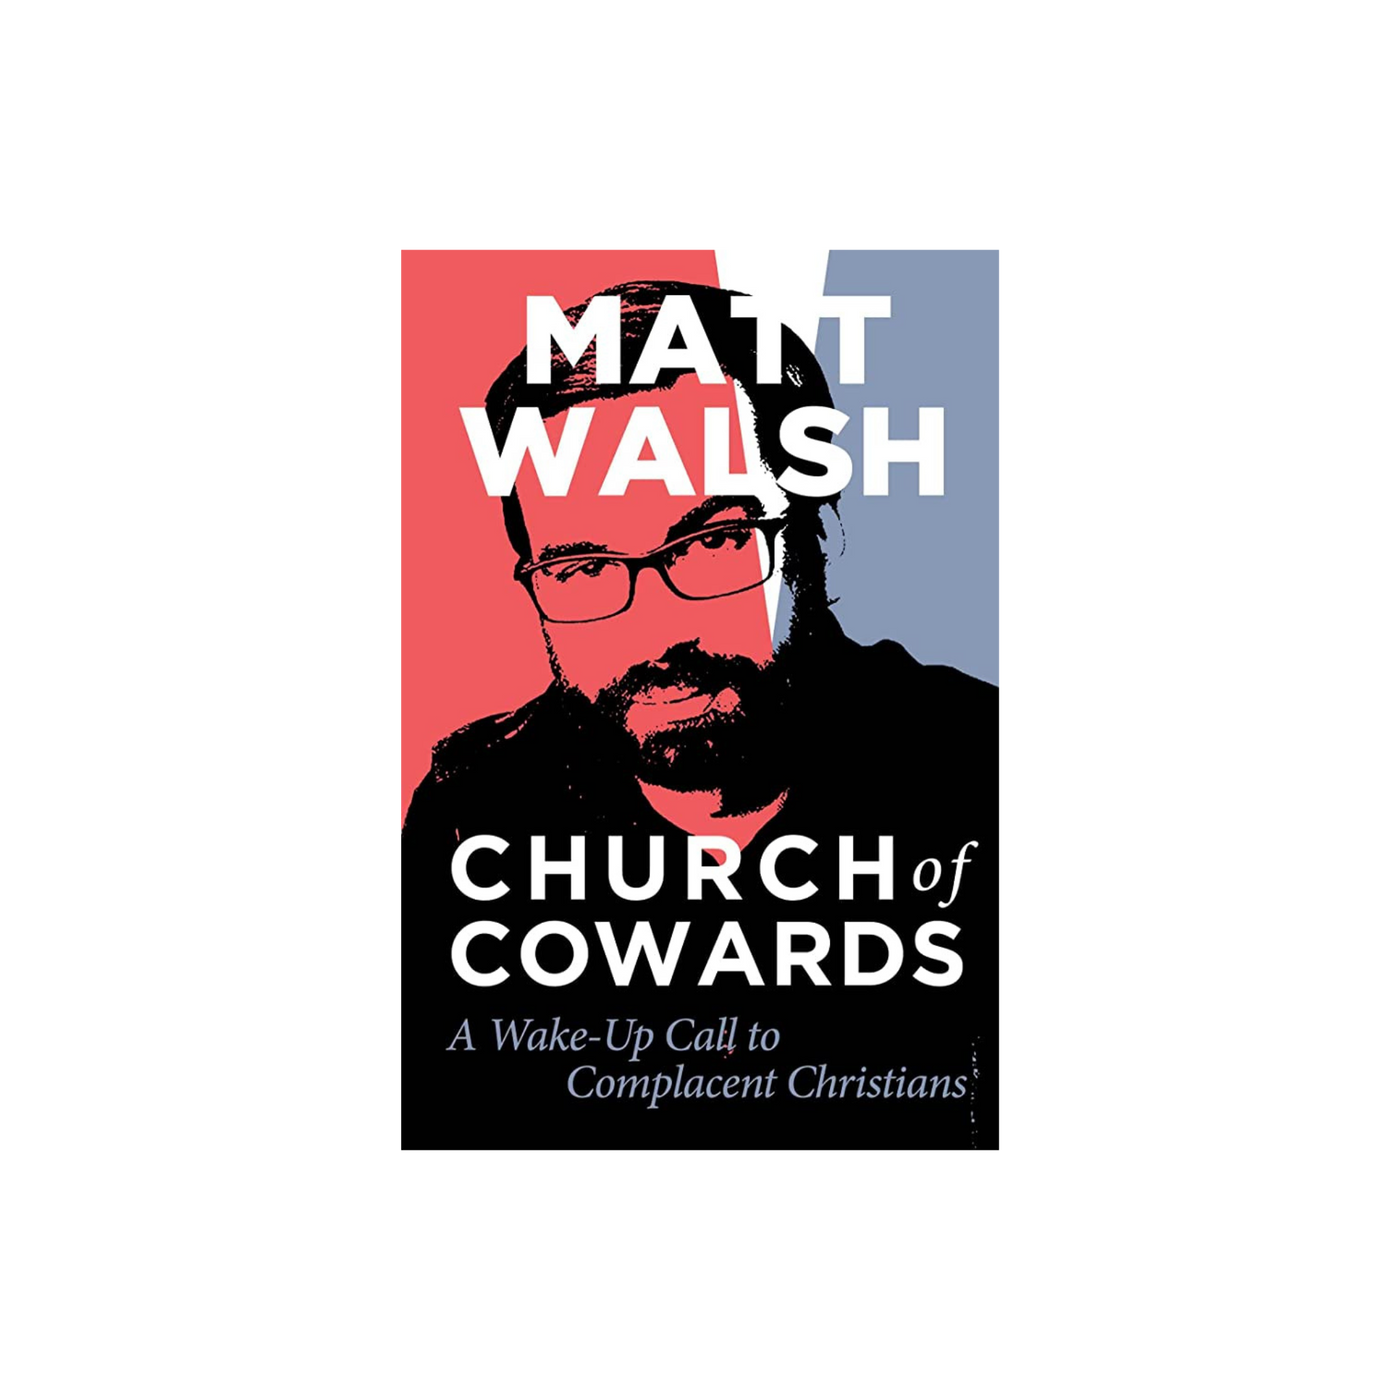 Church of Cowards: A Wake-Up Call to Complacent Christians by Matt Walsh